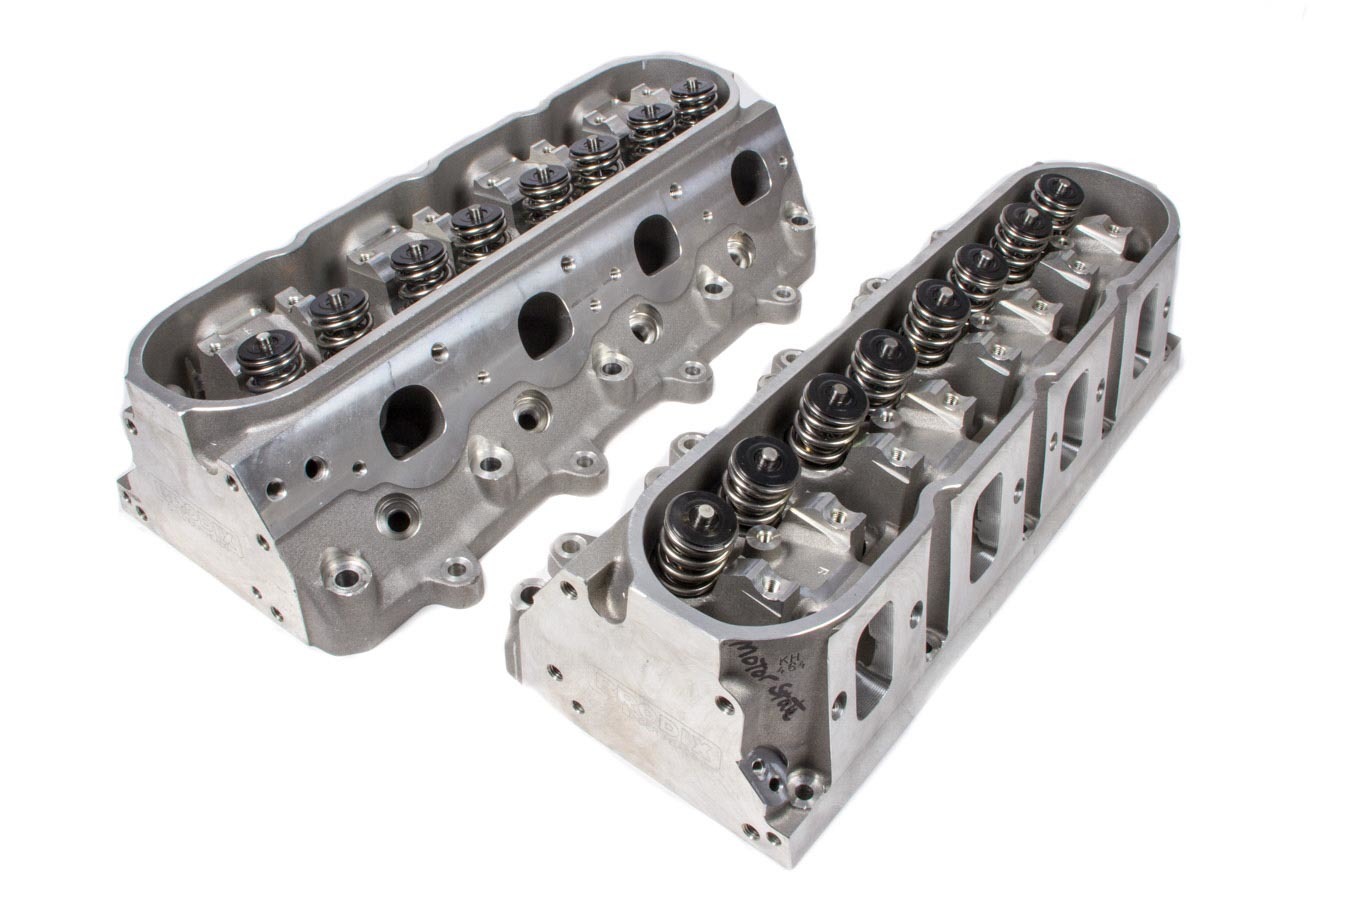 Brodix 1171000 Cylinder Head, BR 7, Assembled, 2.204 / 1.614 in Valves, 262 cc Intake, 71 cc Chamber, 1.350 in Springs, Aluminum, GM LS-Series, Pair